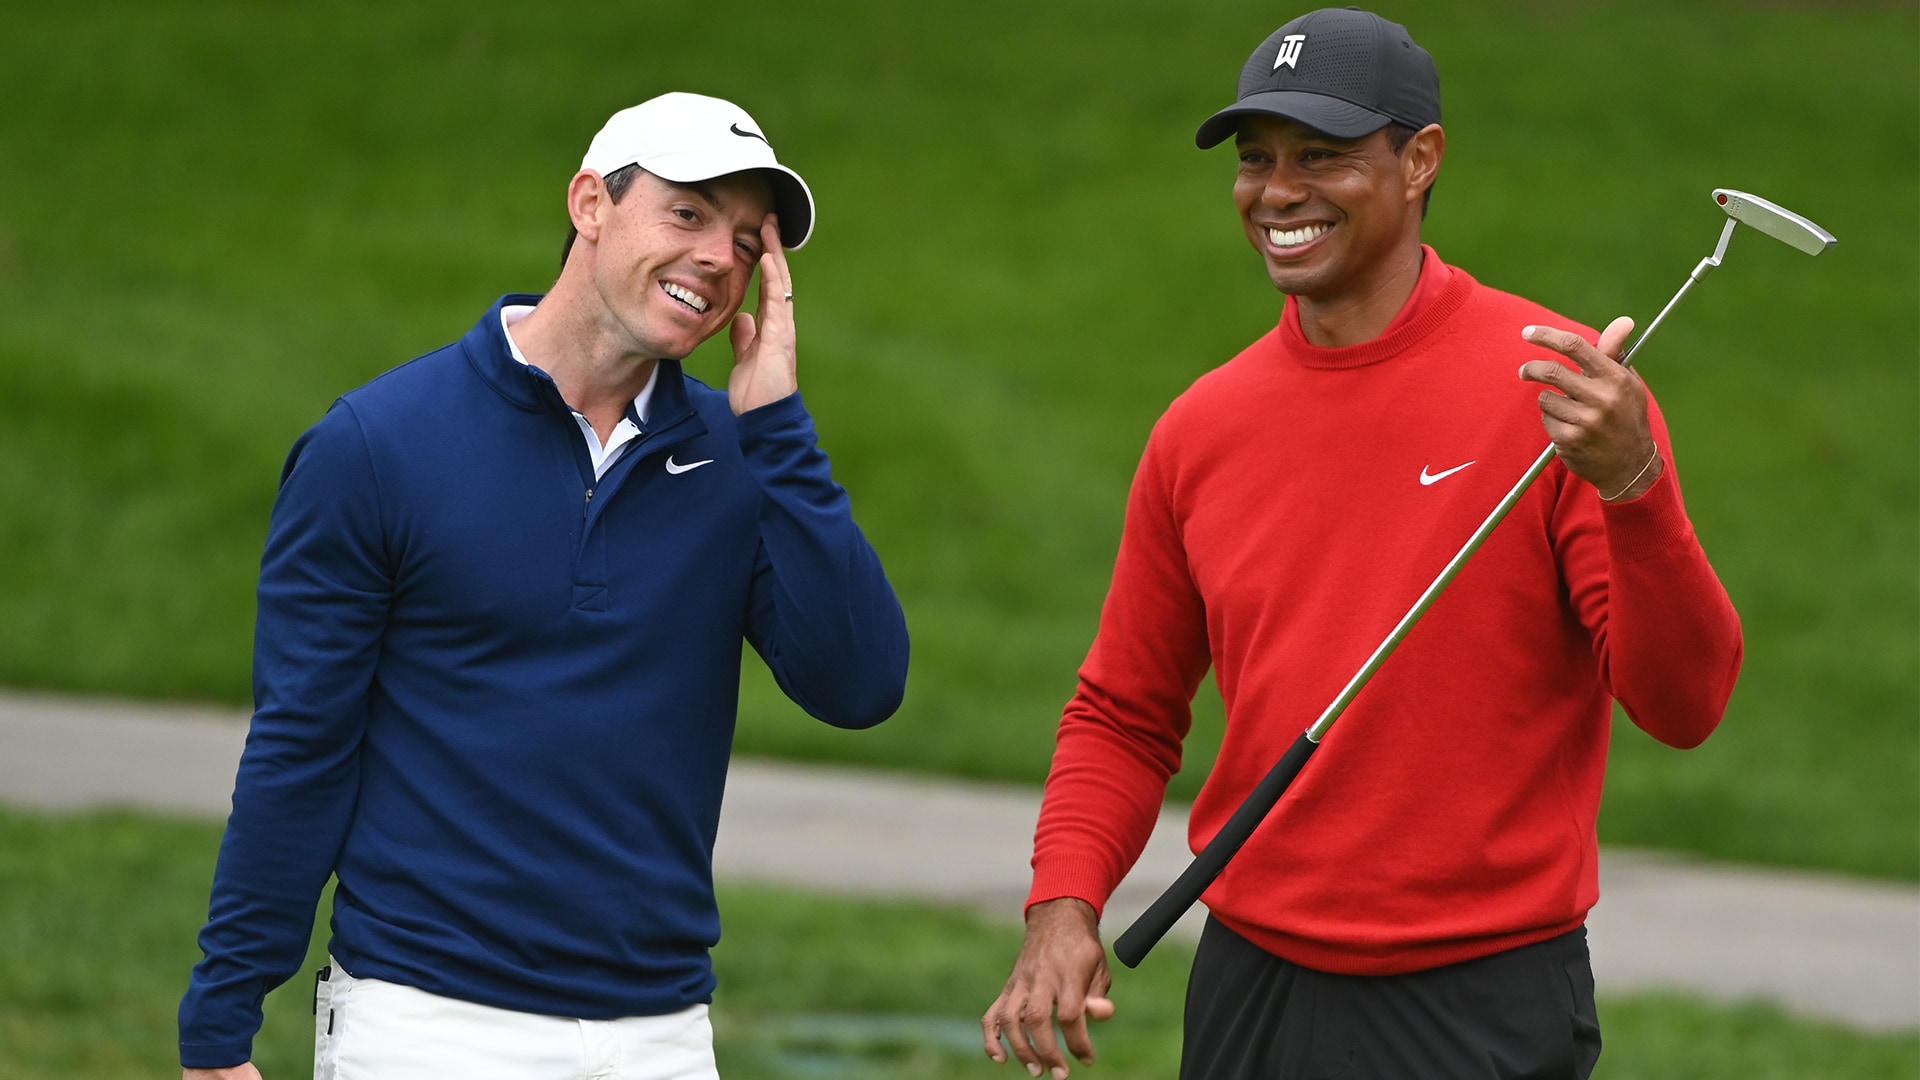 Tiger Woods’ trophy case shows Rory McIlroy why majors are what matter